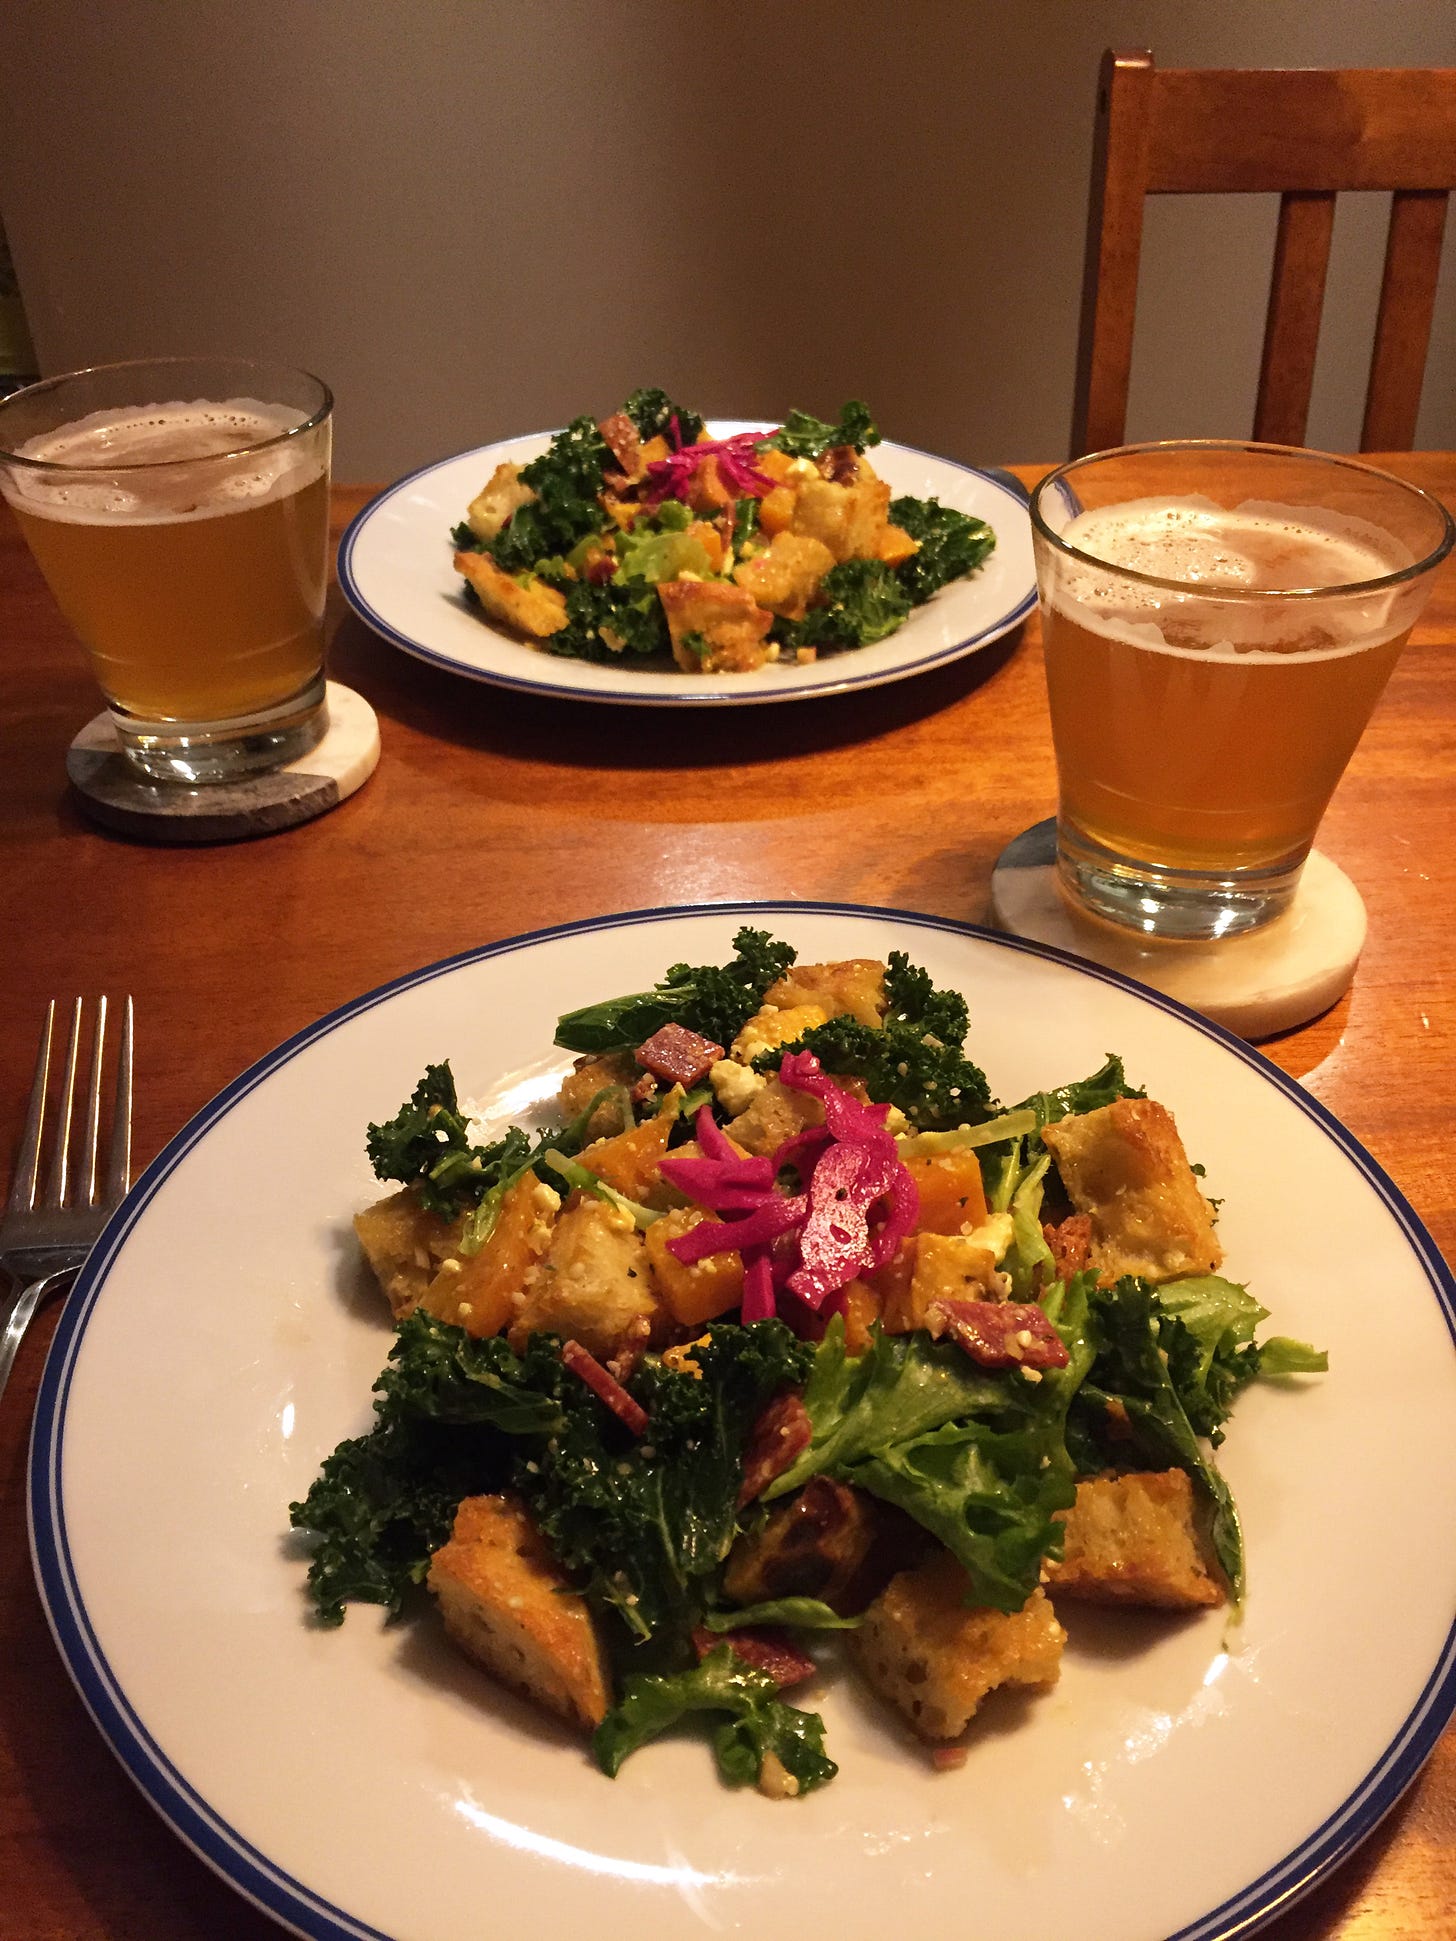 Two plates of panzanella sit across from each other with glasses of beer on coasters next to them. The panzanella is mostly kale and croutons with pieces of golden beet, salami, rutabaga, and pickled cabbage visible throughout.